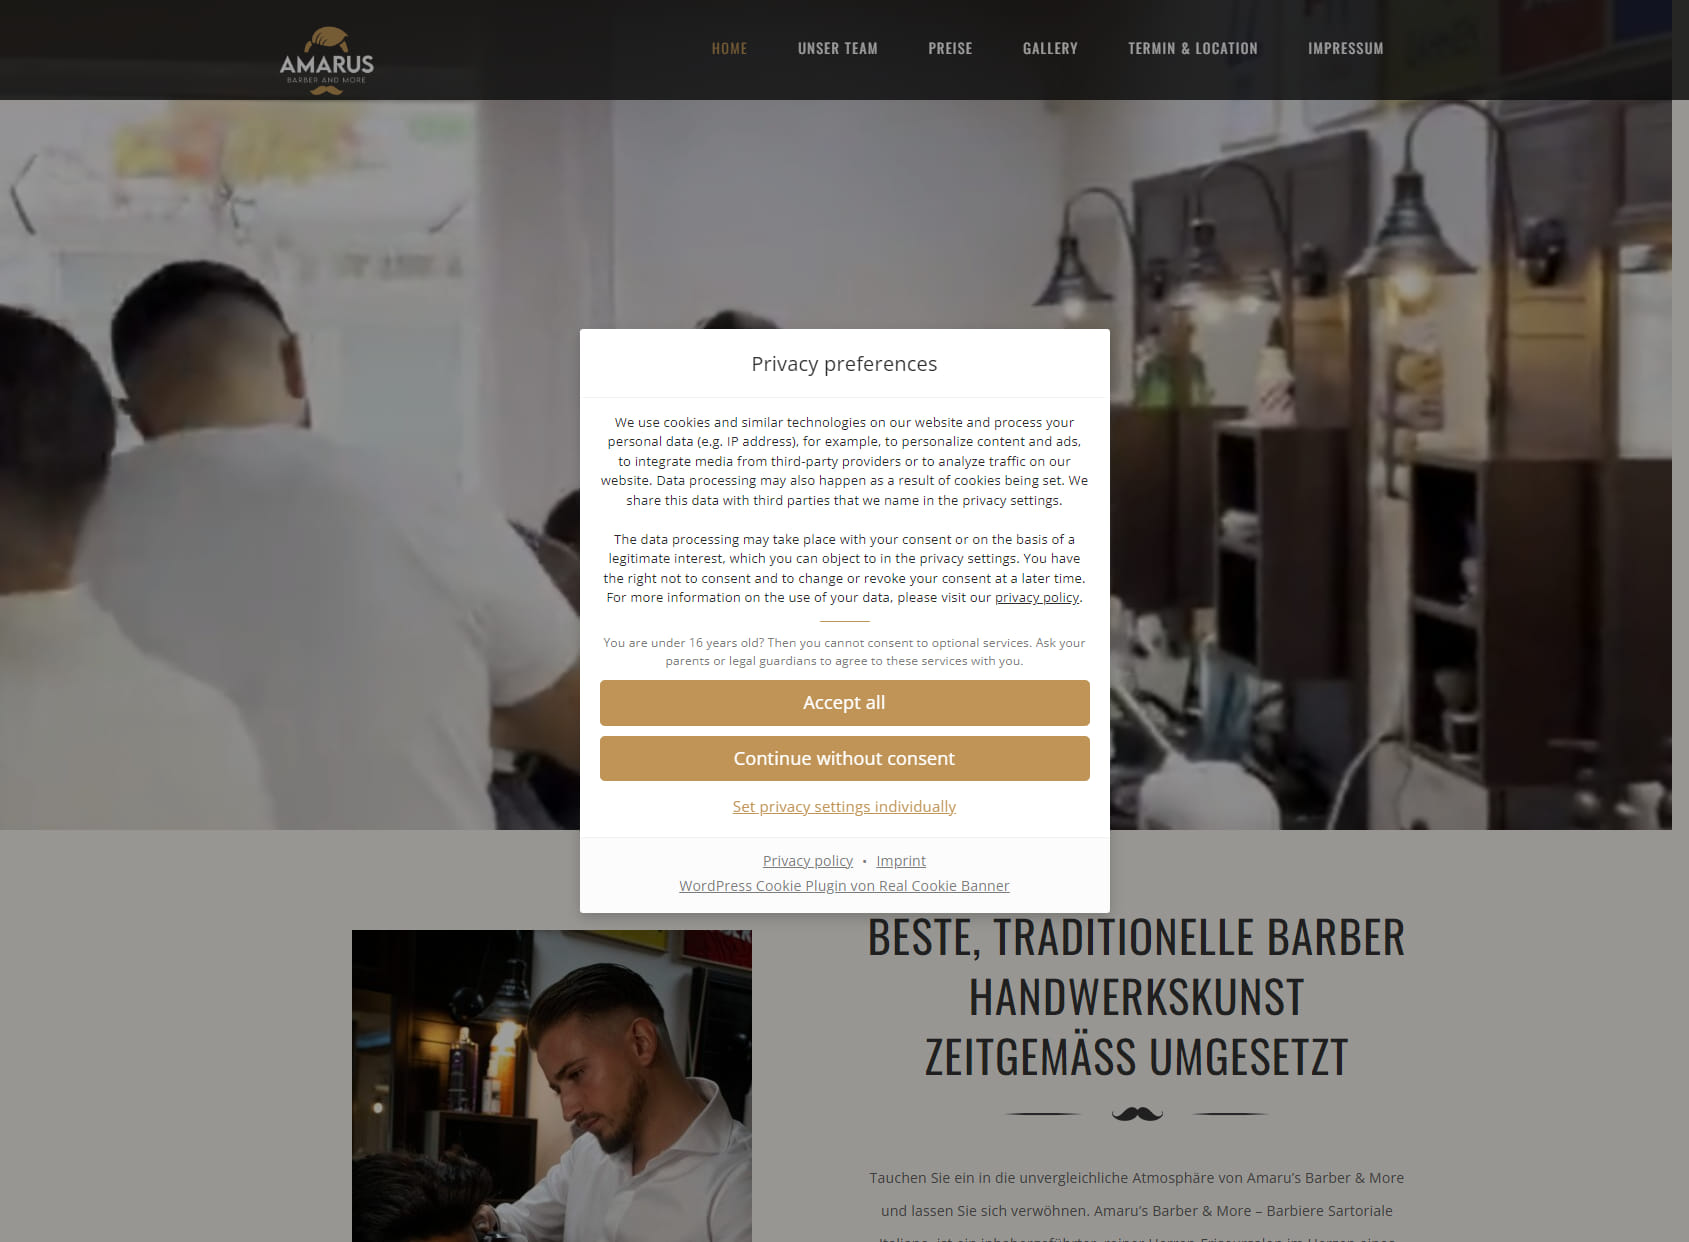 Amaru´s Barber and More